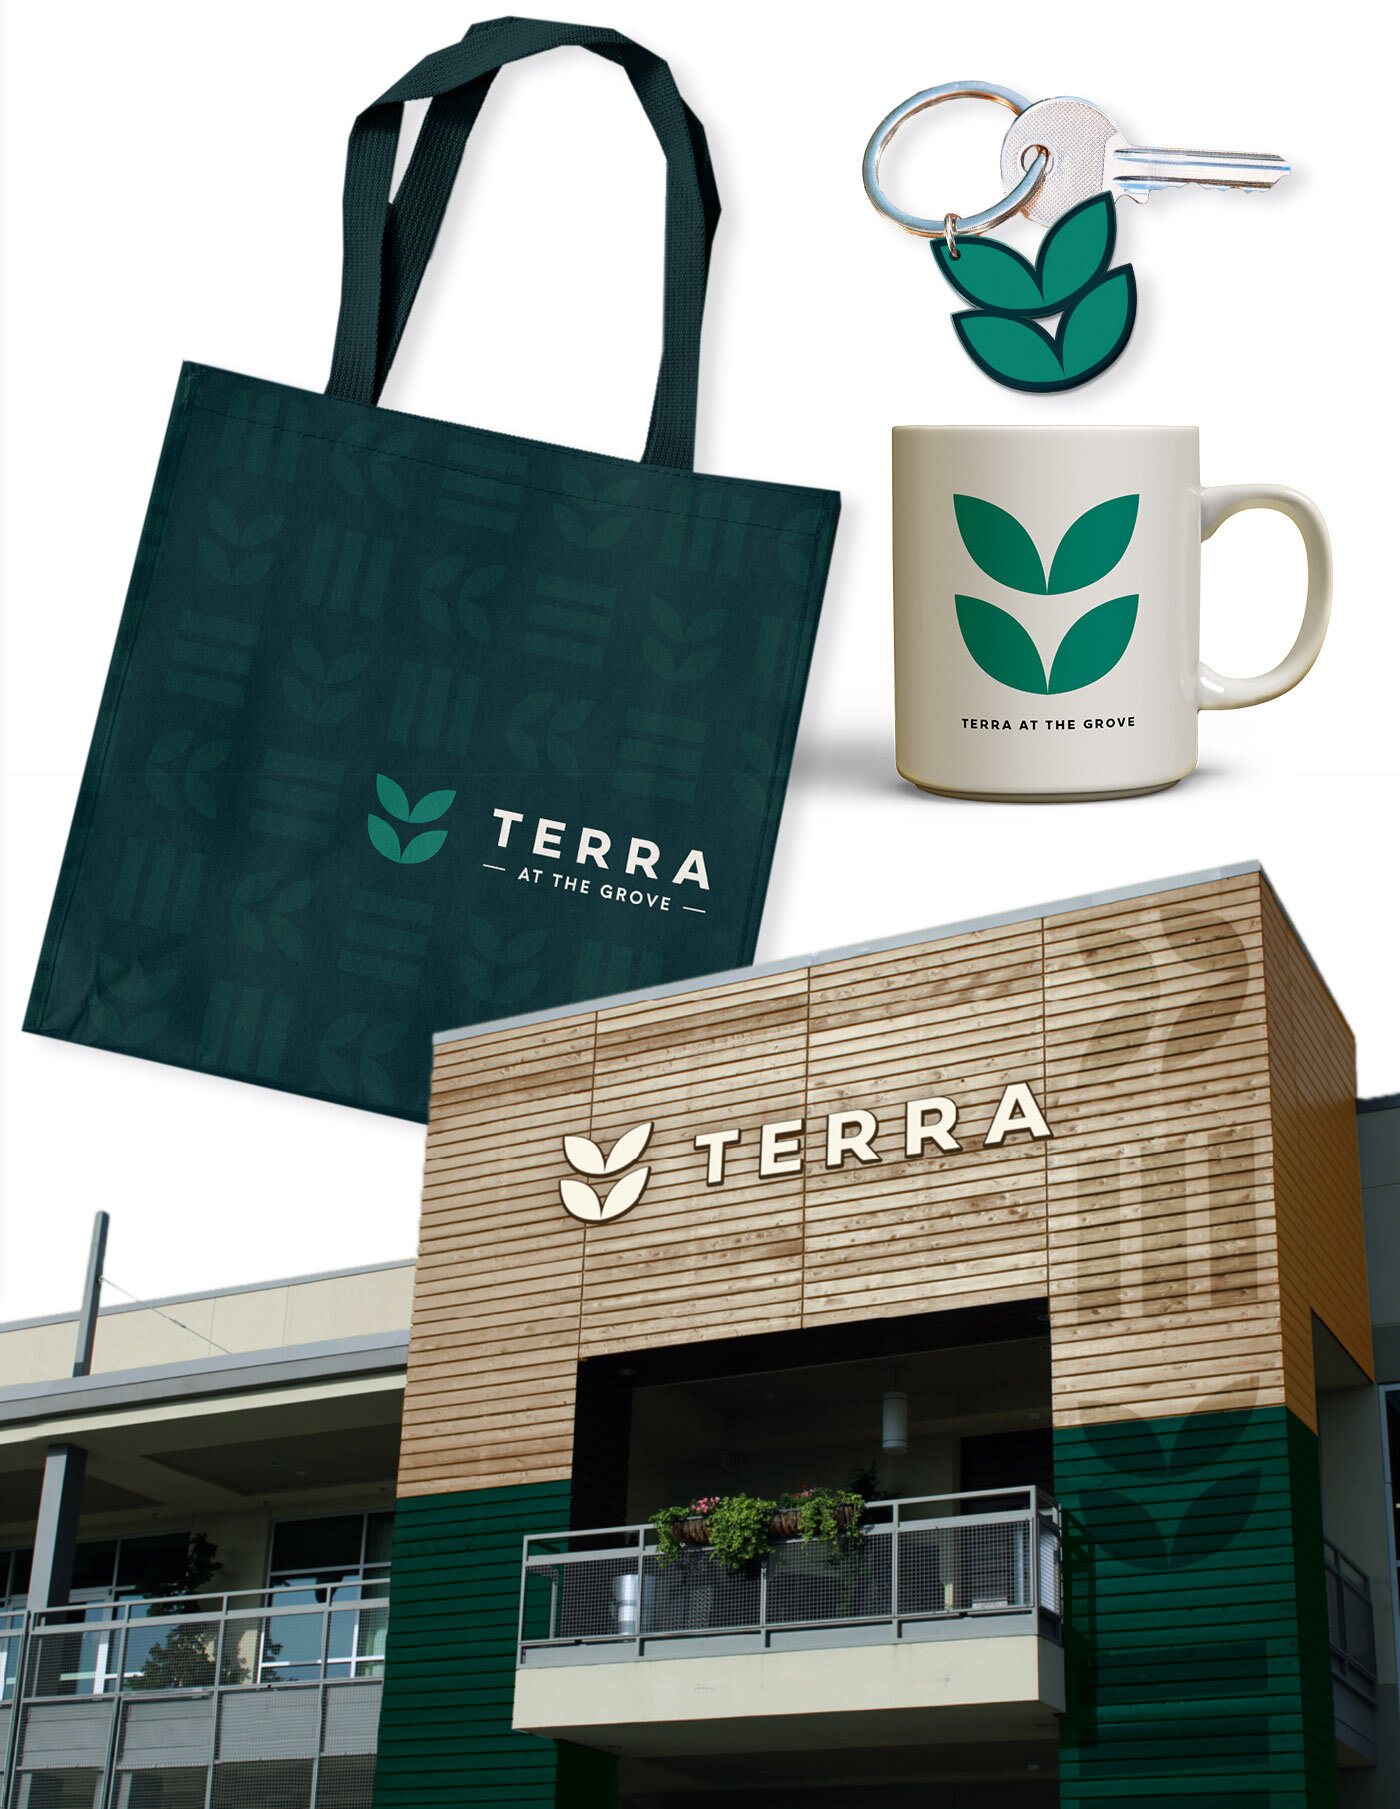 Creative expressions of how the Terra brand can be expressed on signage, gifts and more